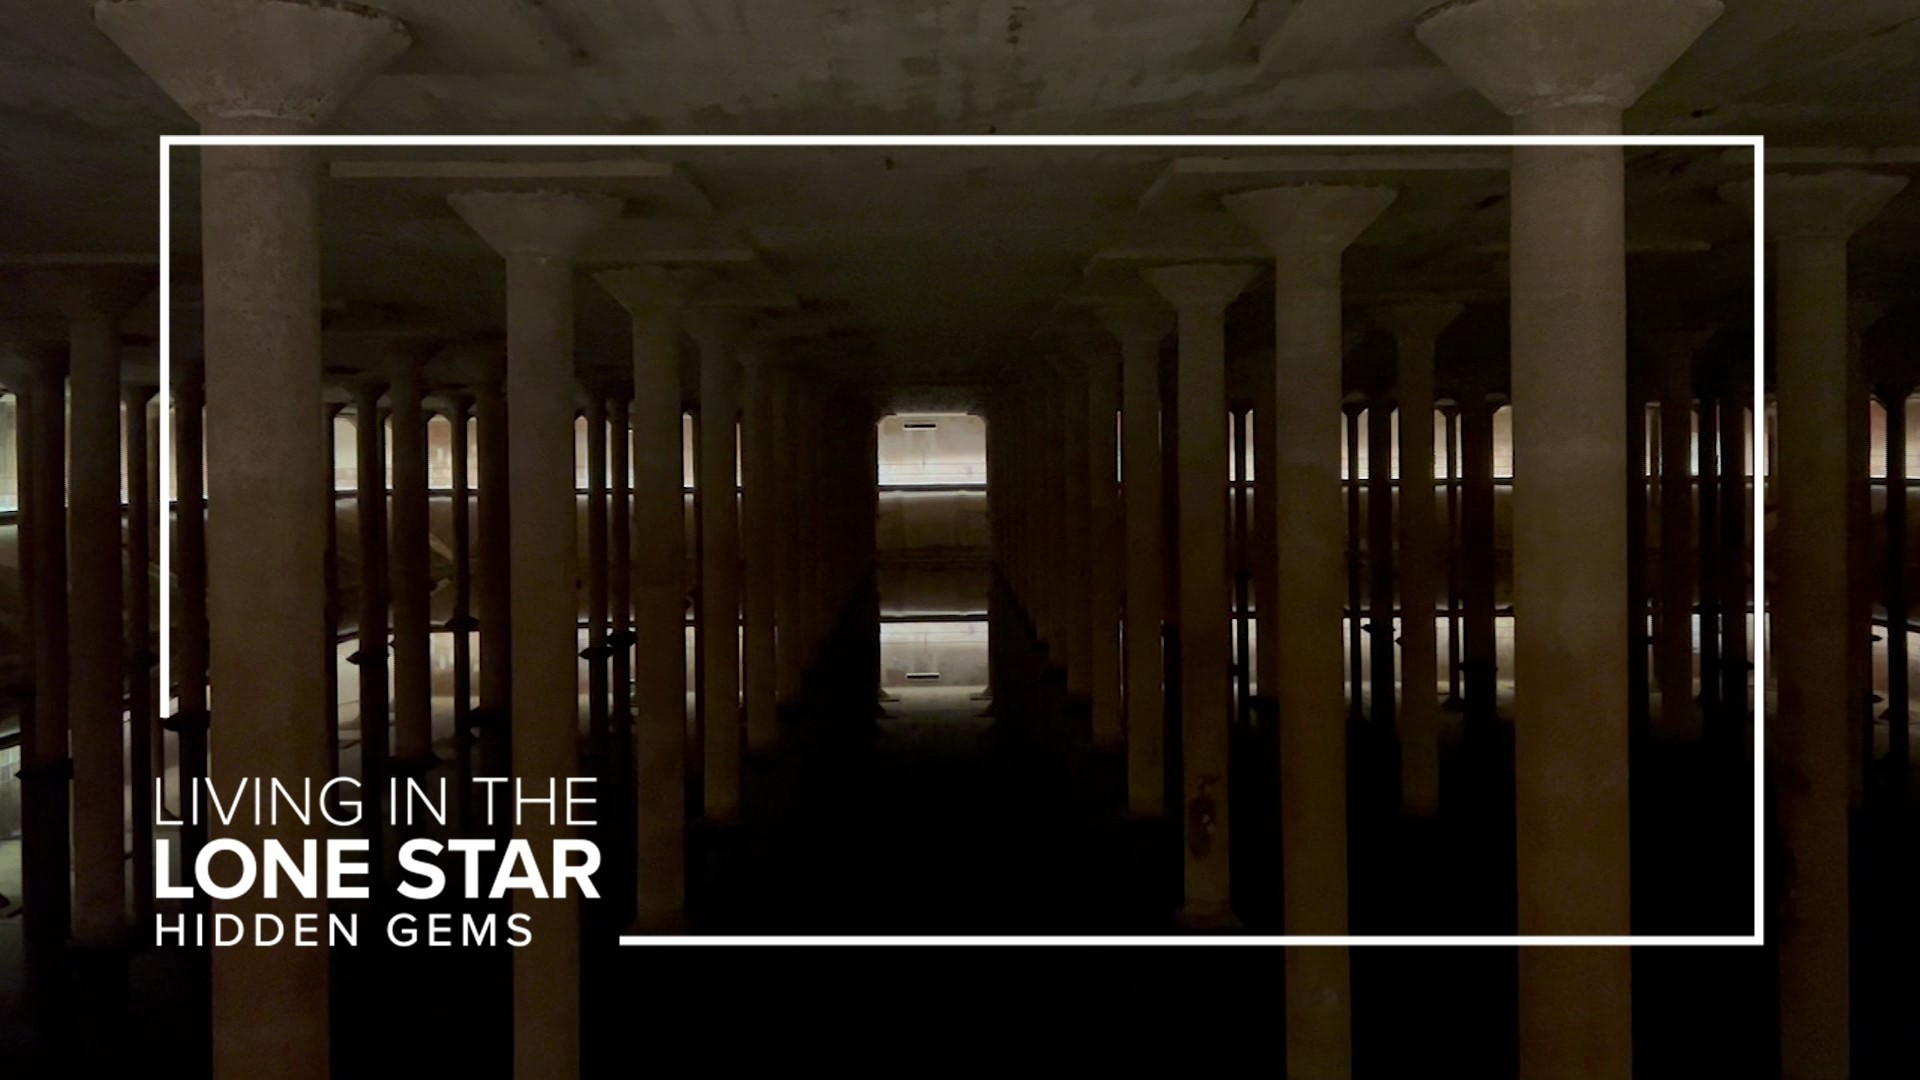 Built in 1926, the 87,000-square-foot underground reservoir could hold 15 million gallons of Houston’s drinking water.